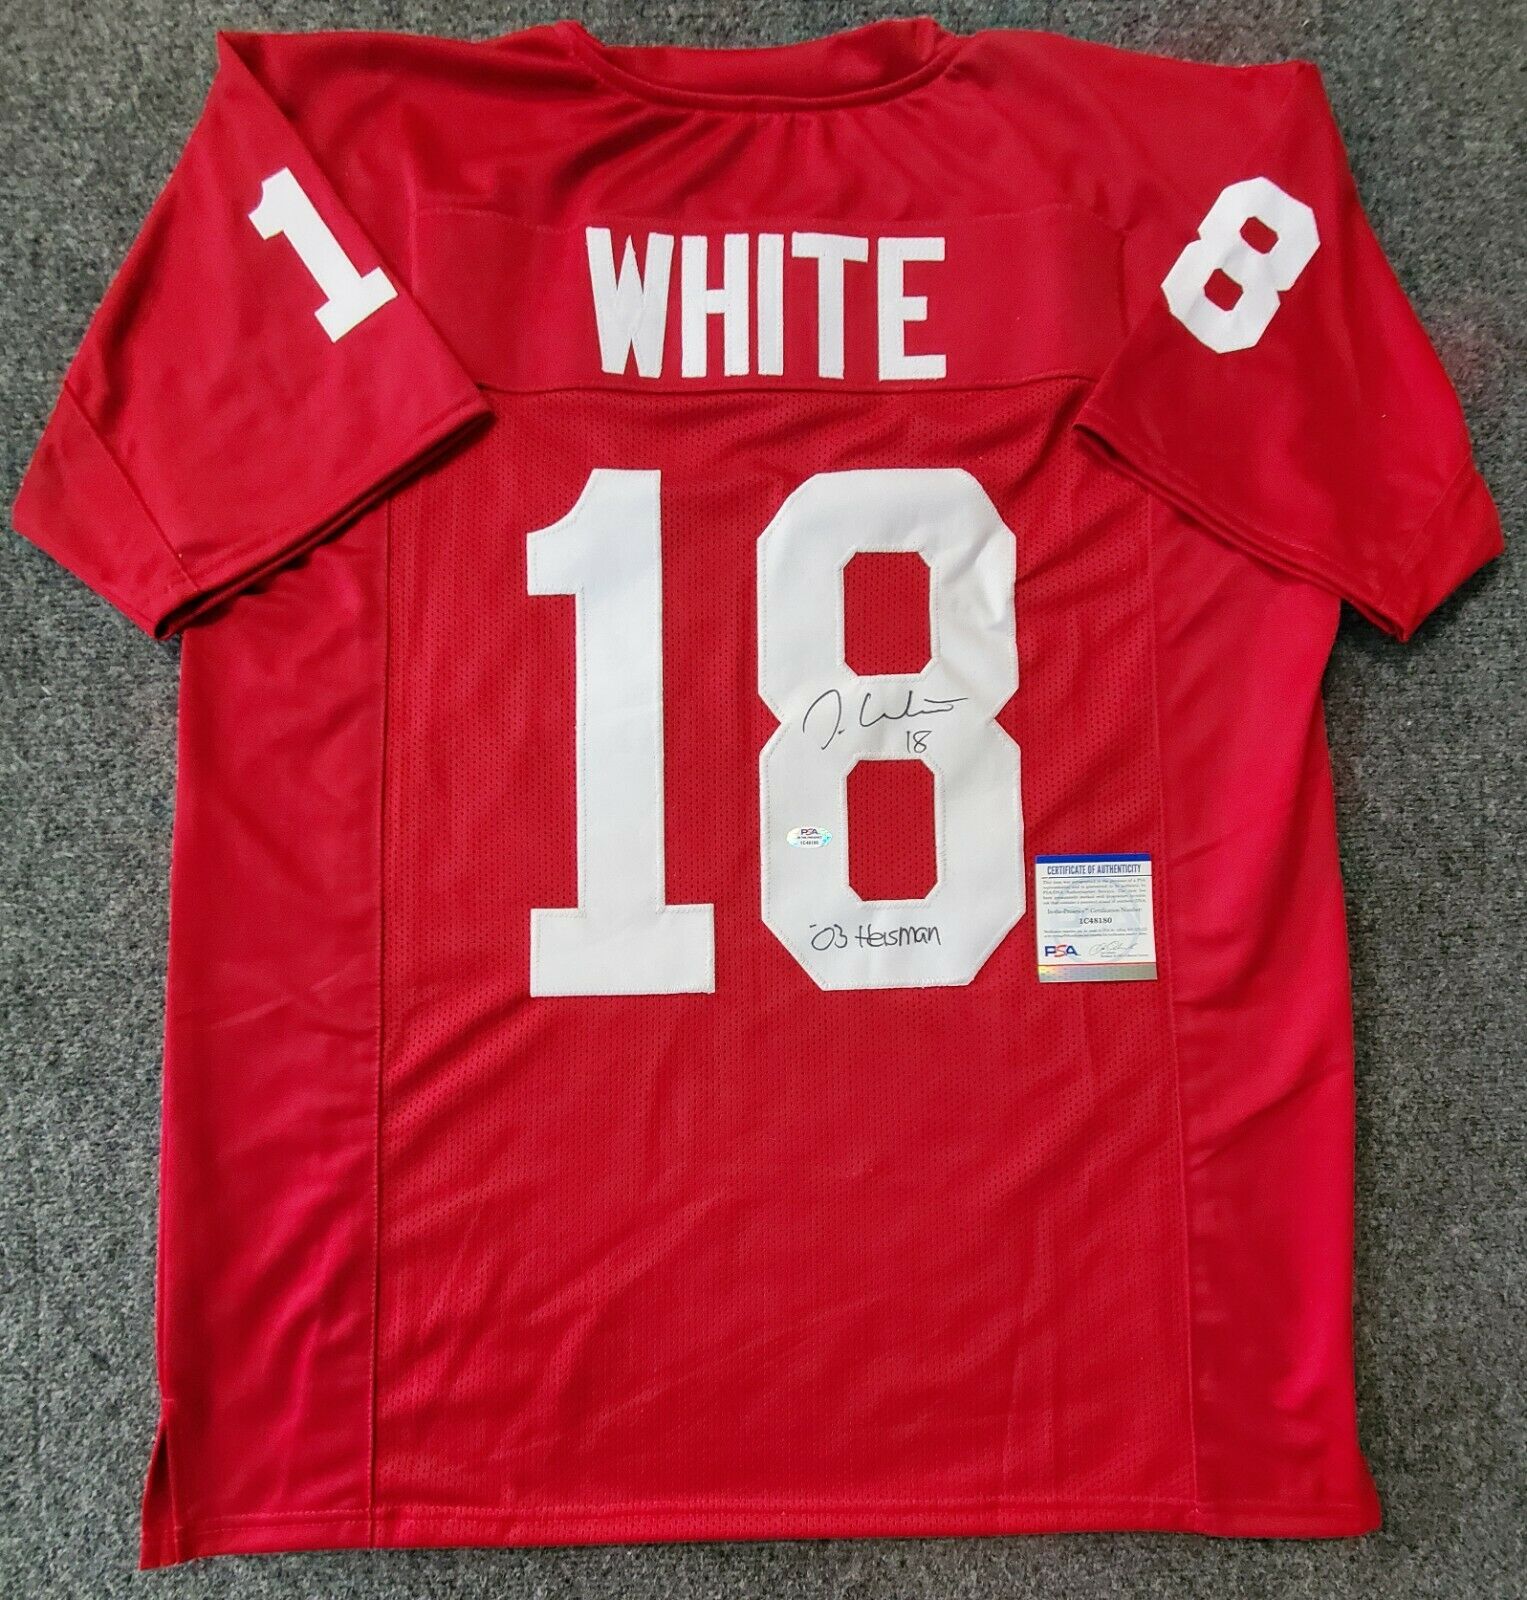 inscribed jersey